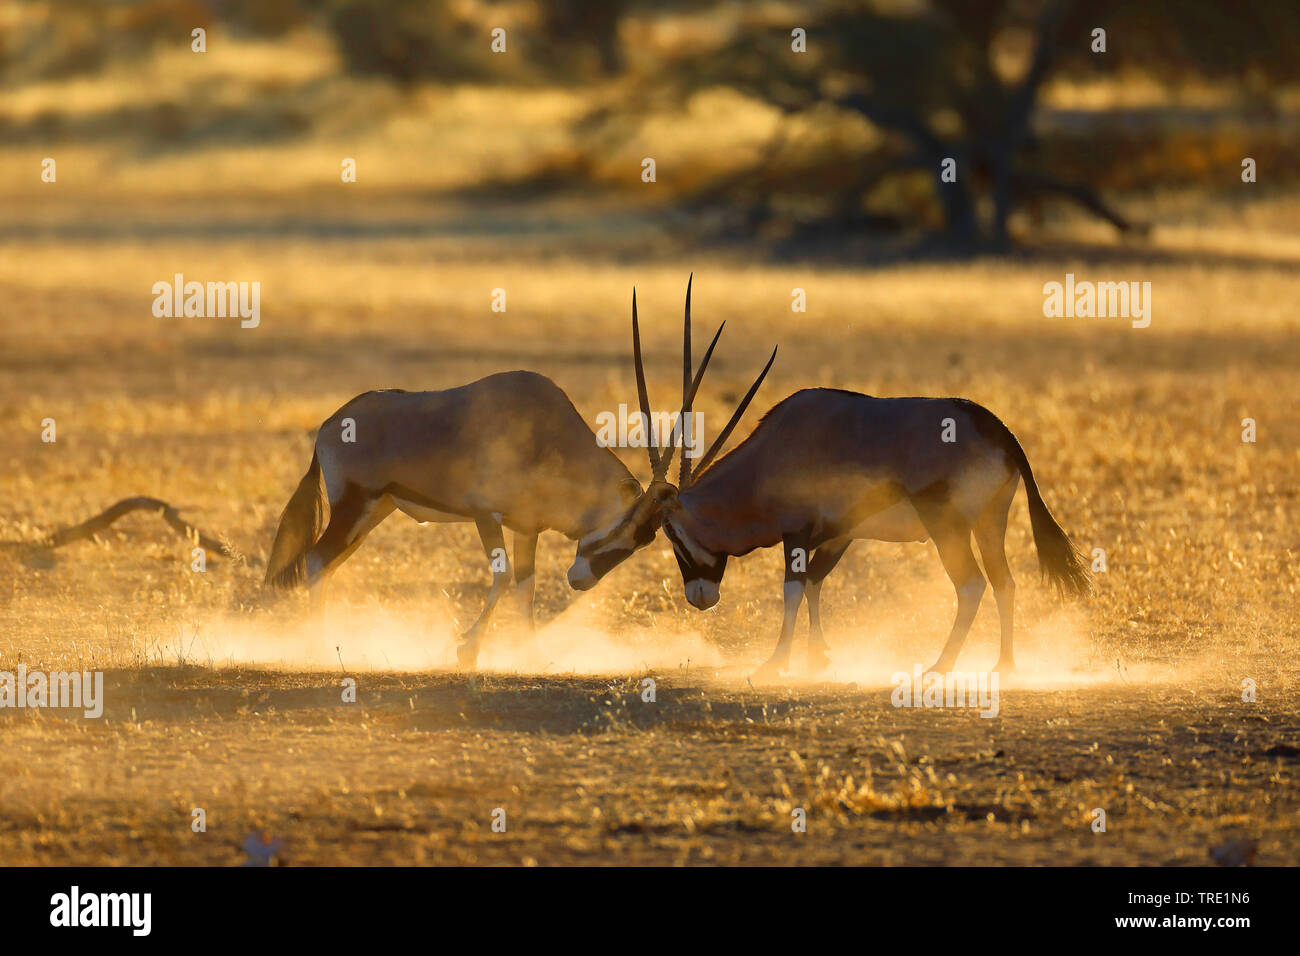 gemsbock, beisa (Oryx gazella), territorial fight of two males in the savannah, contre-jour shot, South Africa Stock Photo